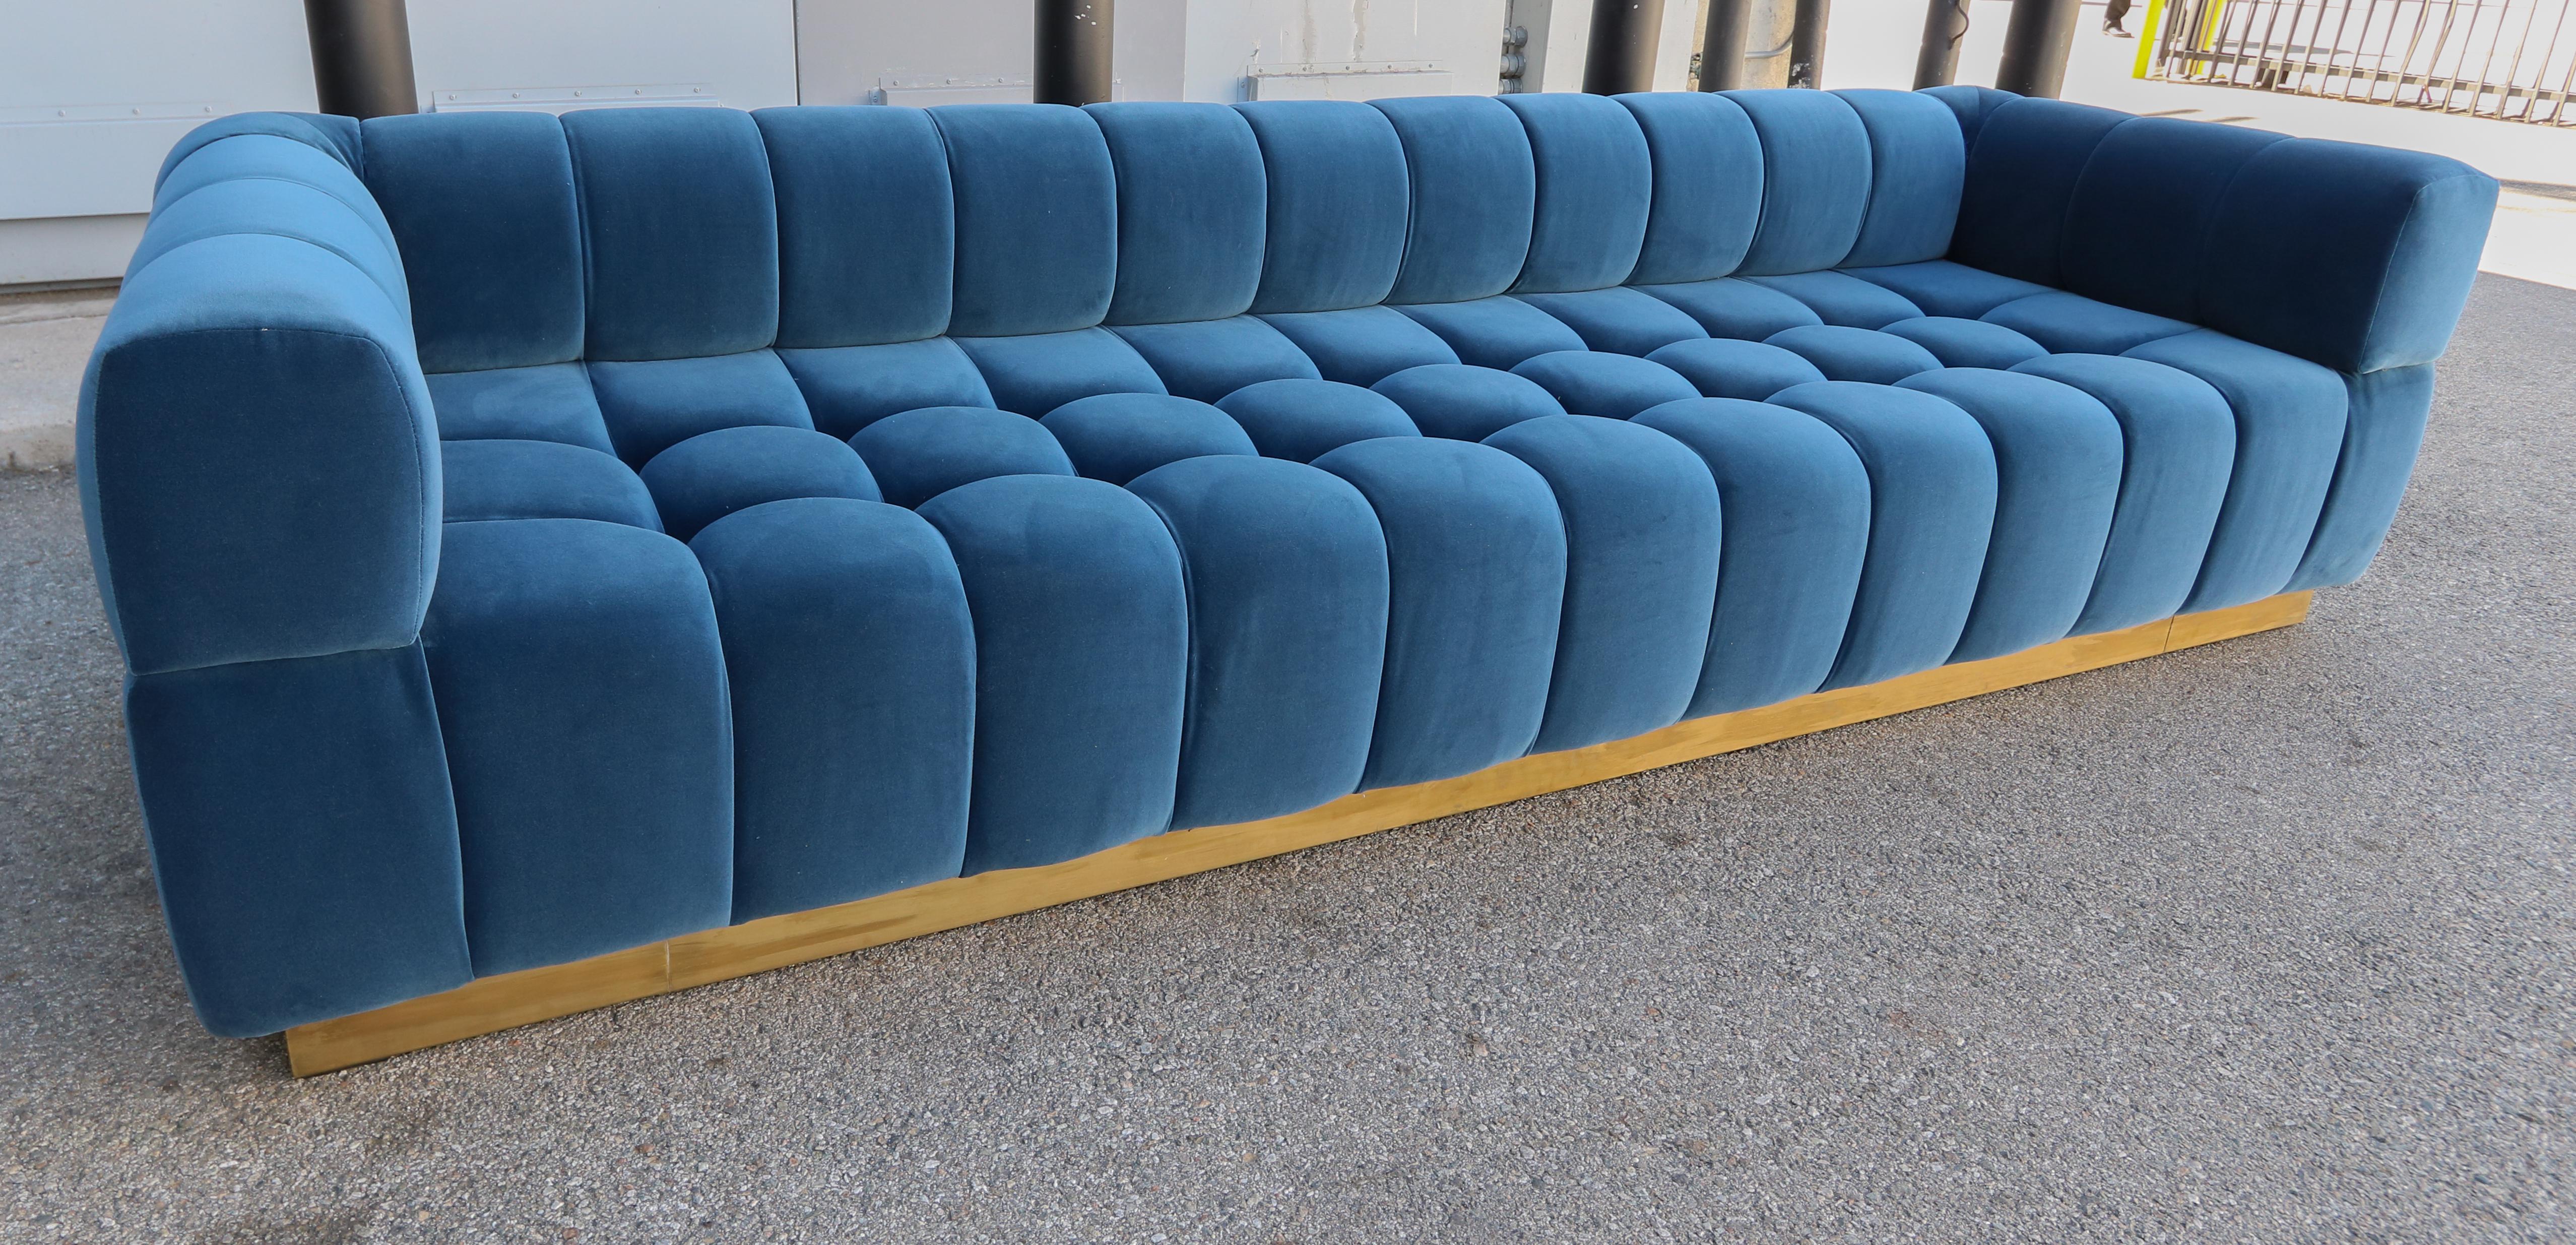 Custom Tufted Blue Velvet Sofa with Brass Base by Adesso Imports For Sale 2